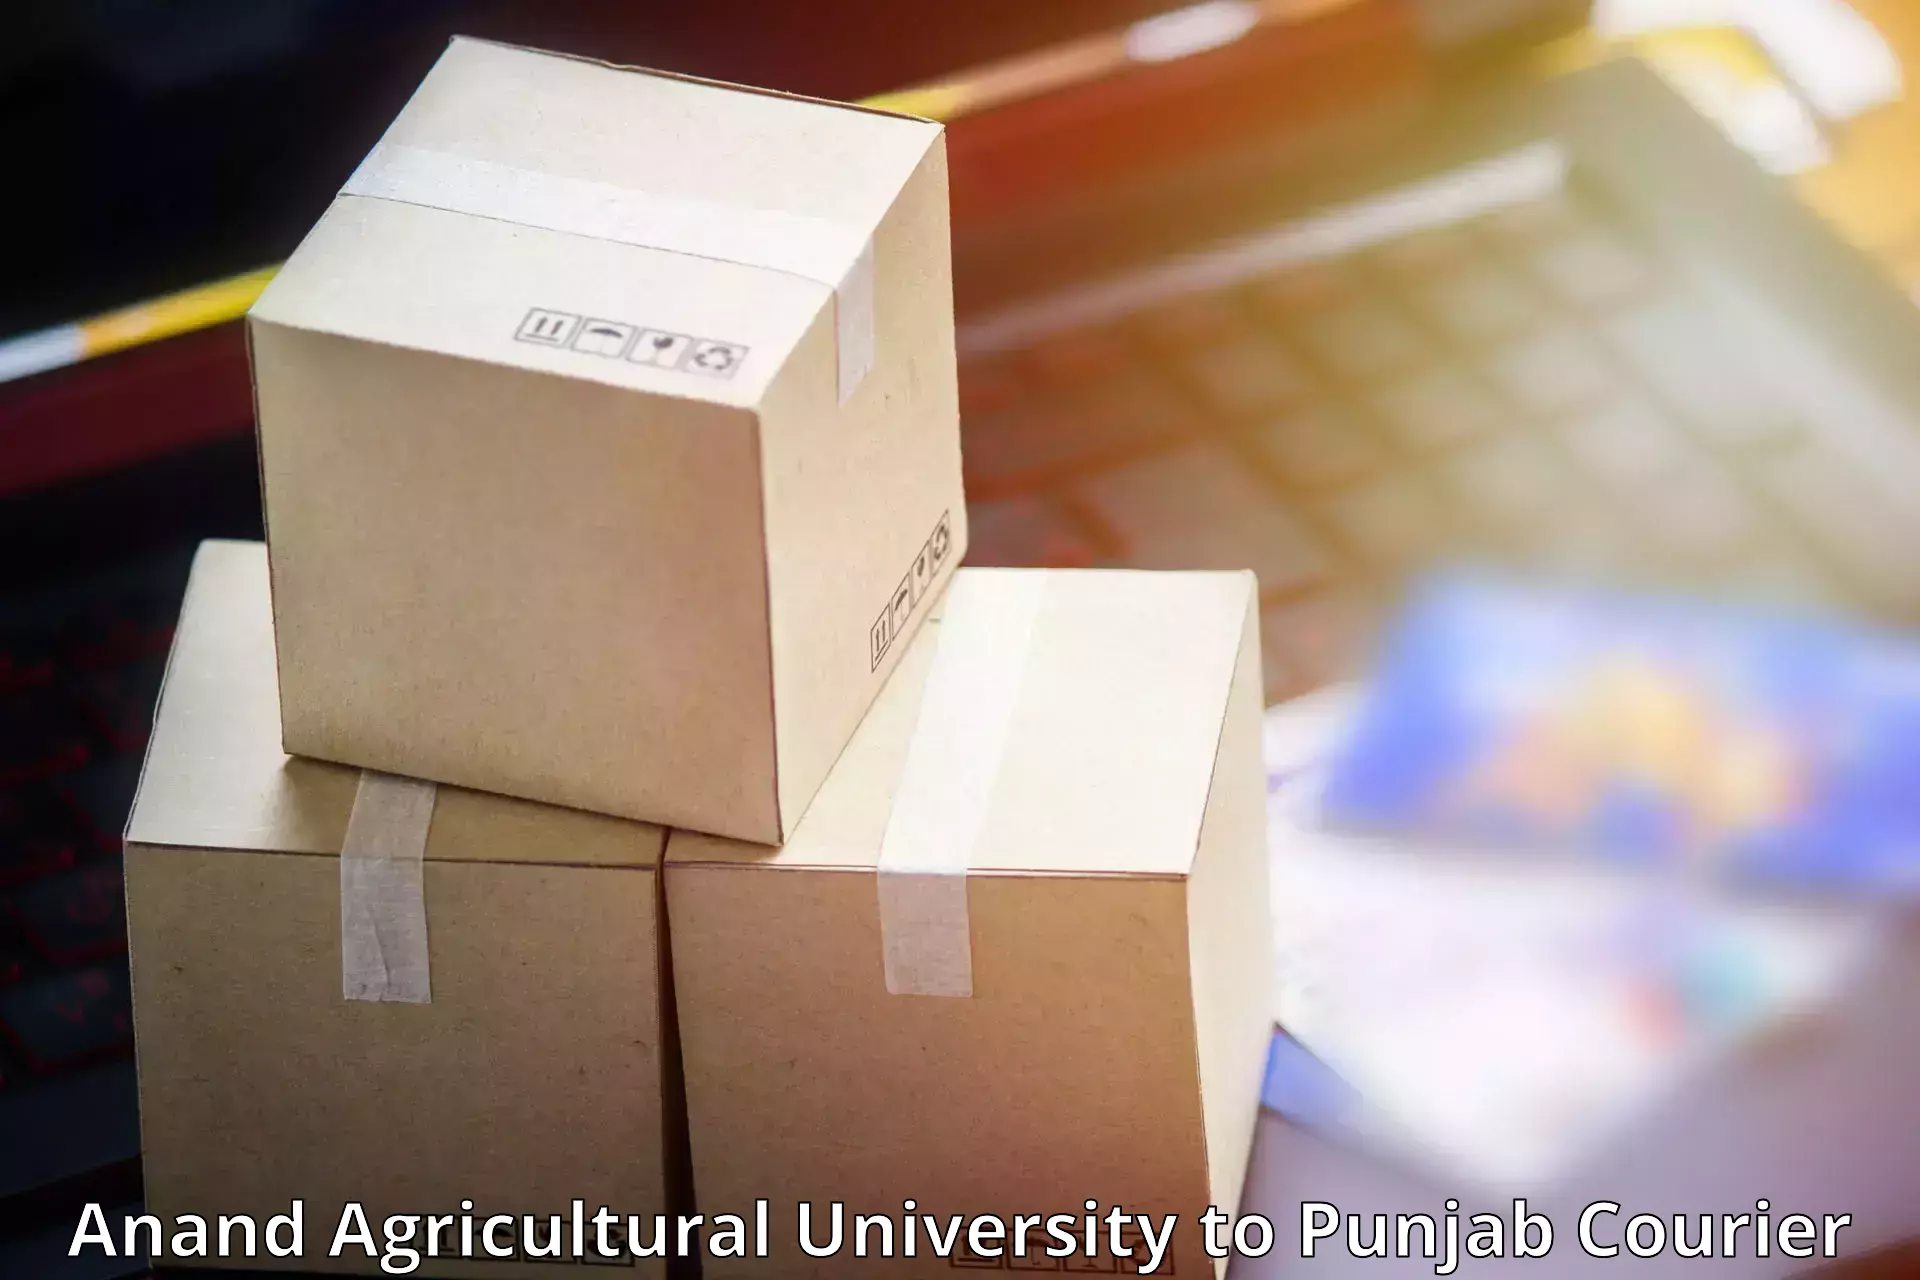 Punctual parcel services Anand Agricultural University to Muktsar